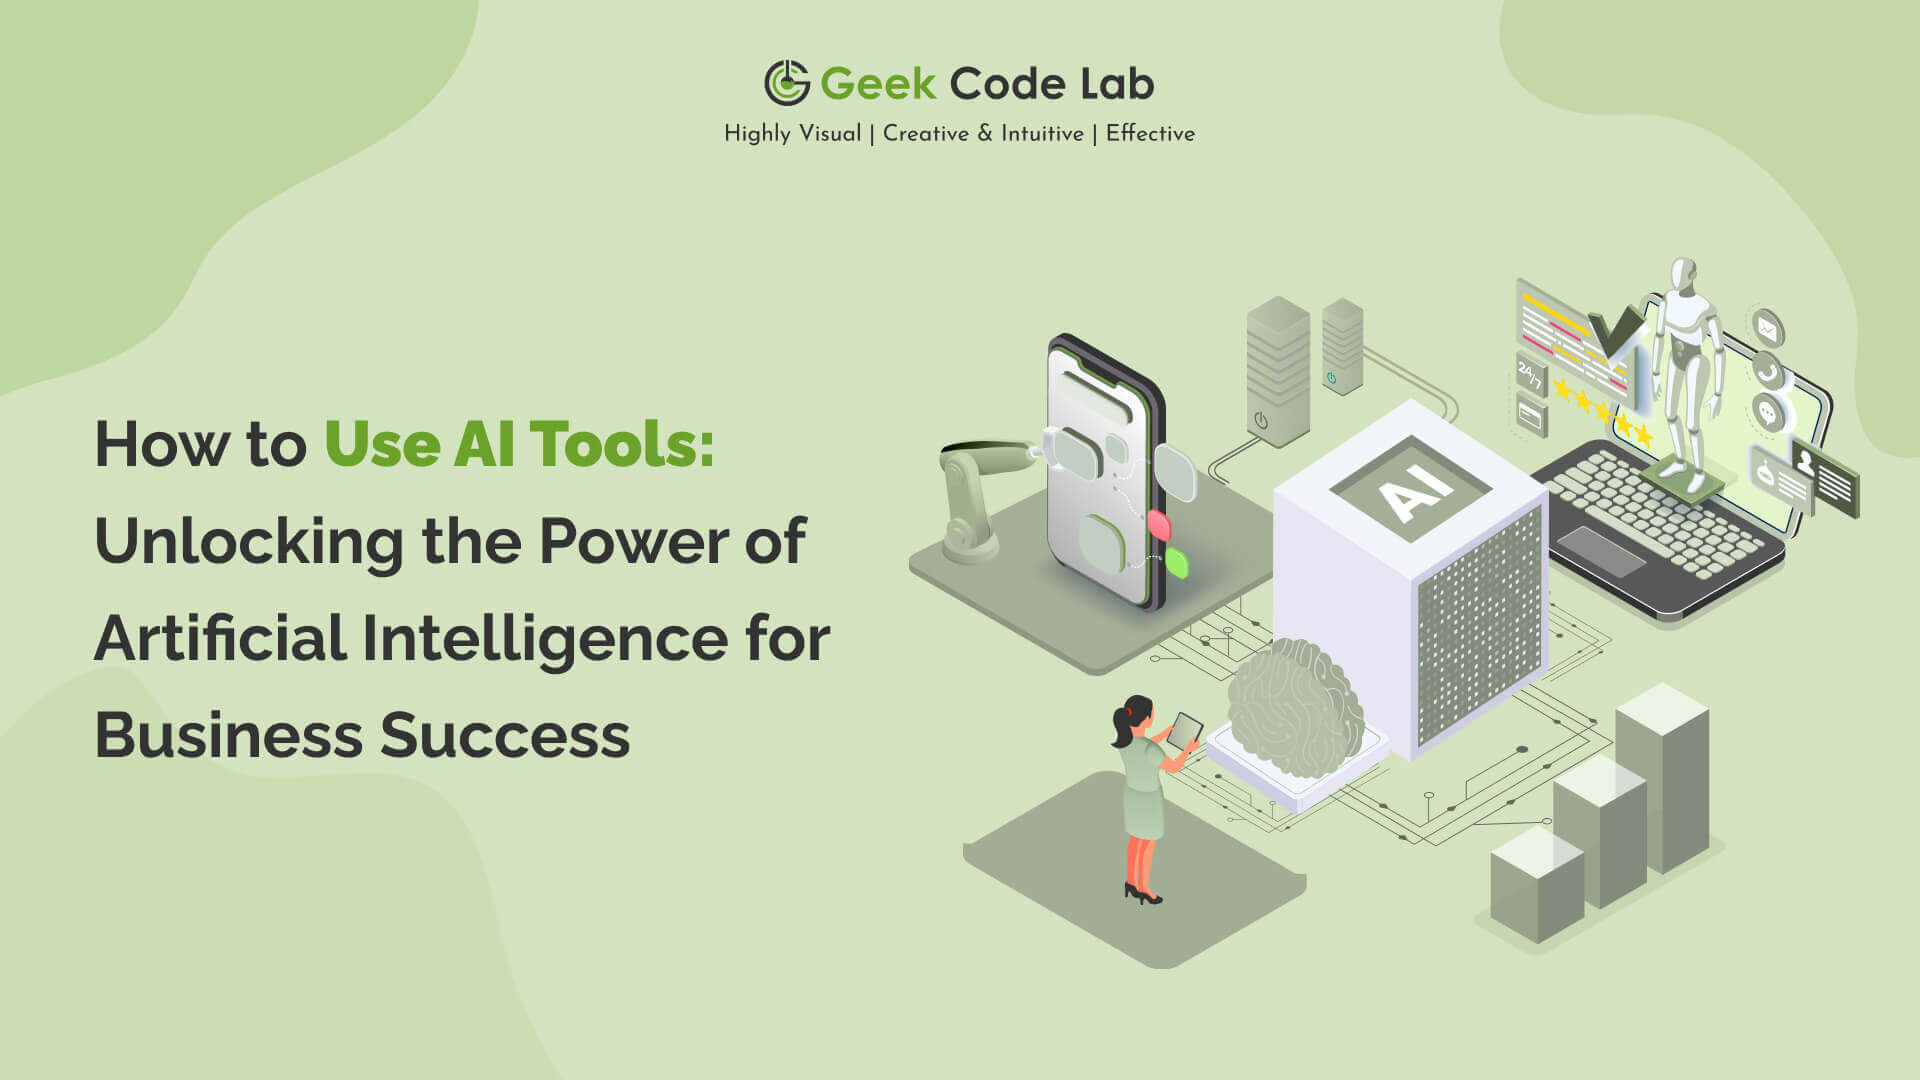 How to Use AI Tools: Unlocking the Power of Artificial Intelligence for Business Success